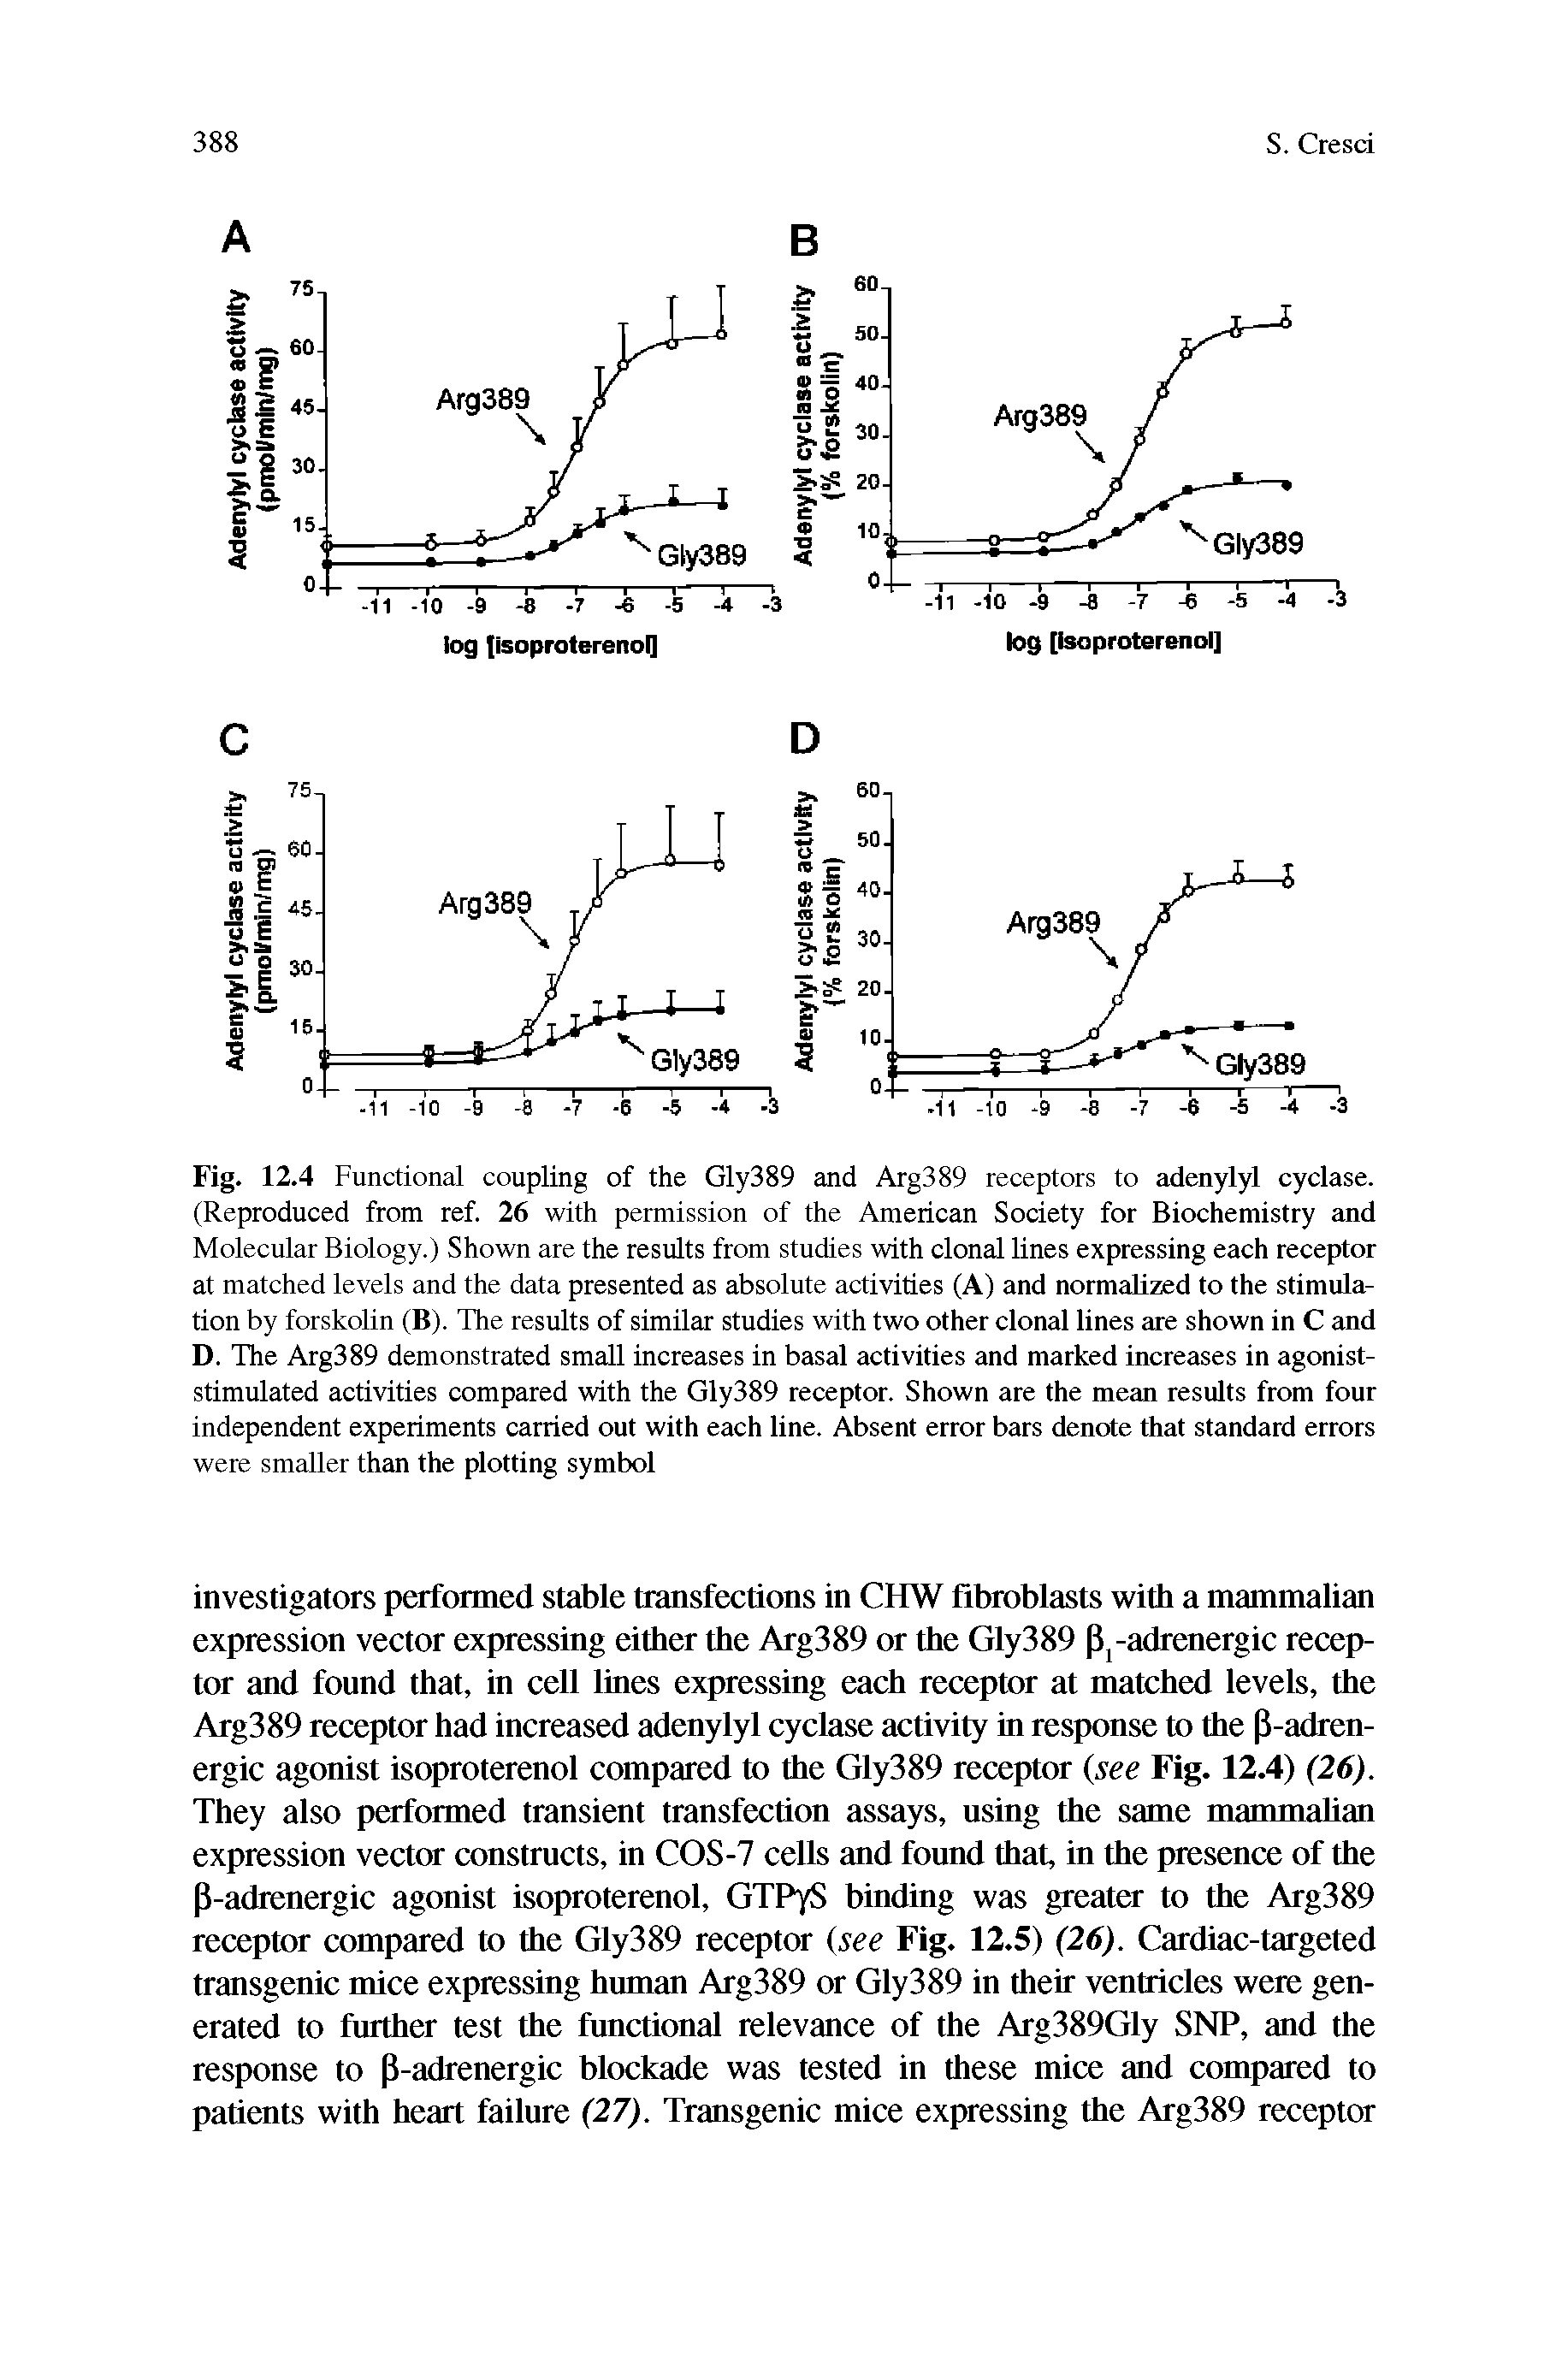 Fig. 12.4 Functional coupling of the Gly389 and Arg389 receptors to adenylyl cyclase. (Reproduced from ref. 26 with permission of the American Society for Biochemistry and Molecular Biology.) Shown are the results from studies with clonal lines expressing each receptor at matched levels and the data presented as absolute activities (A) and normaUzed to the stimulation by forskolin (B). The results of similar studies with two other clonal lines are shown in C and D. The Arg389 demonstrated small increases in basal activities and marked increases in agonist-stimulated activities compared with the Gly389 receptor. Shown are the mean results from four independent experiments carried out with each line. Absent error bars denote that standard errors were smaller than the plotting symbol...